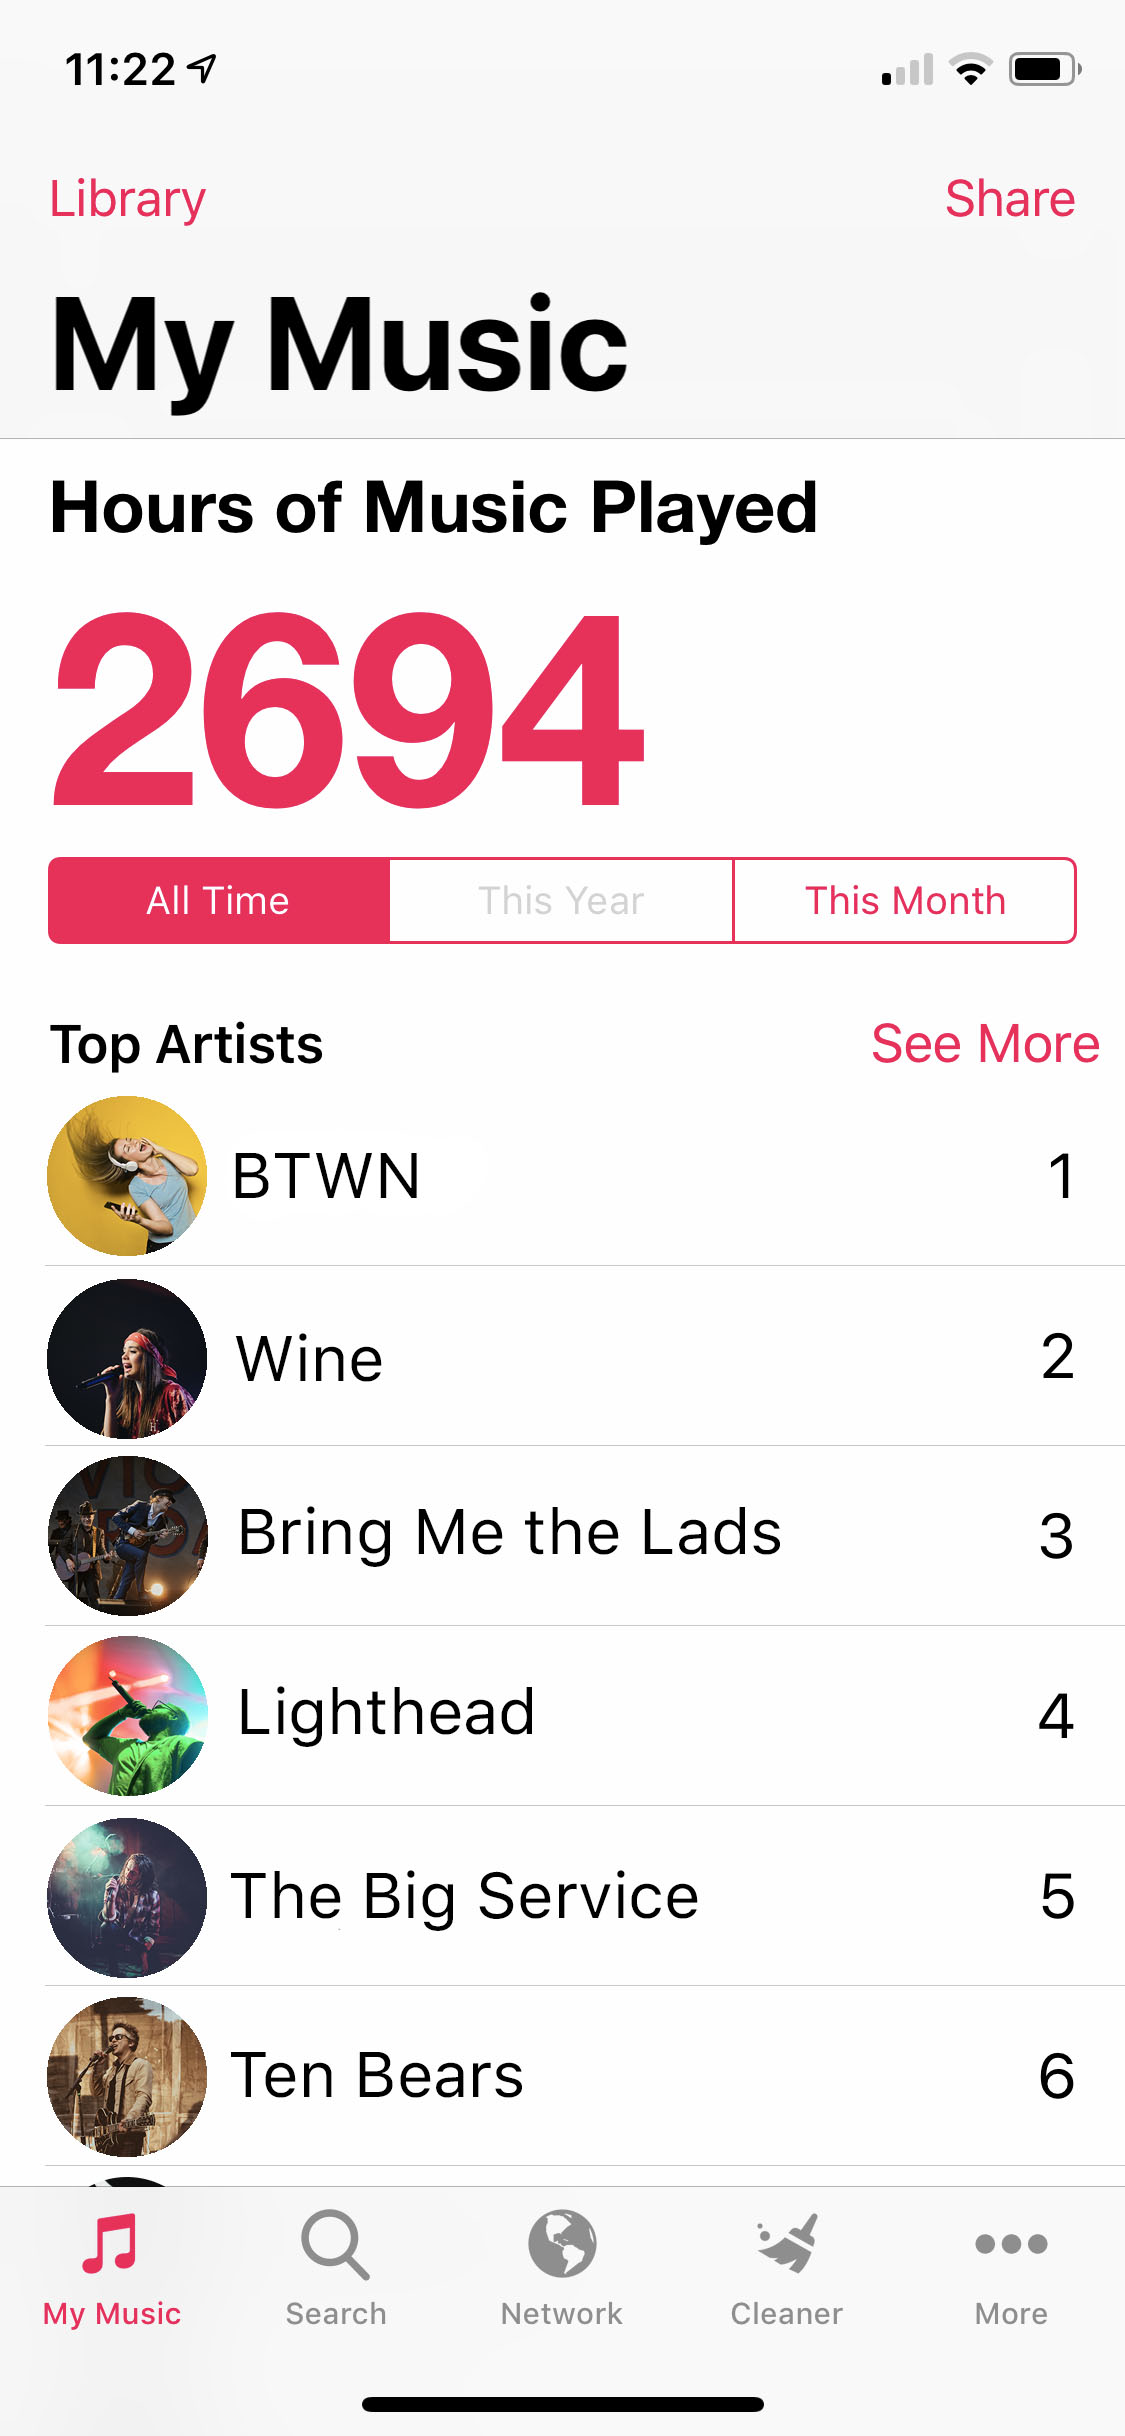 snd.wave is displaying a user's music stats, showing the user their Top Apple Music or iTunes artists, top songs, top albums, total play time, and more!